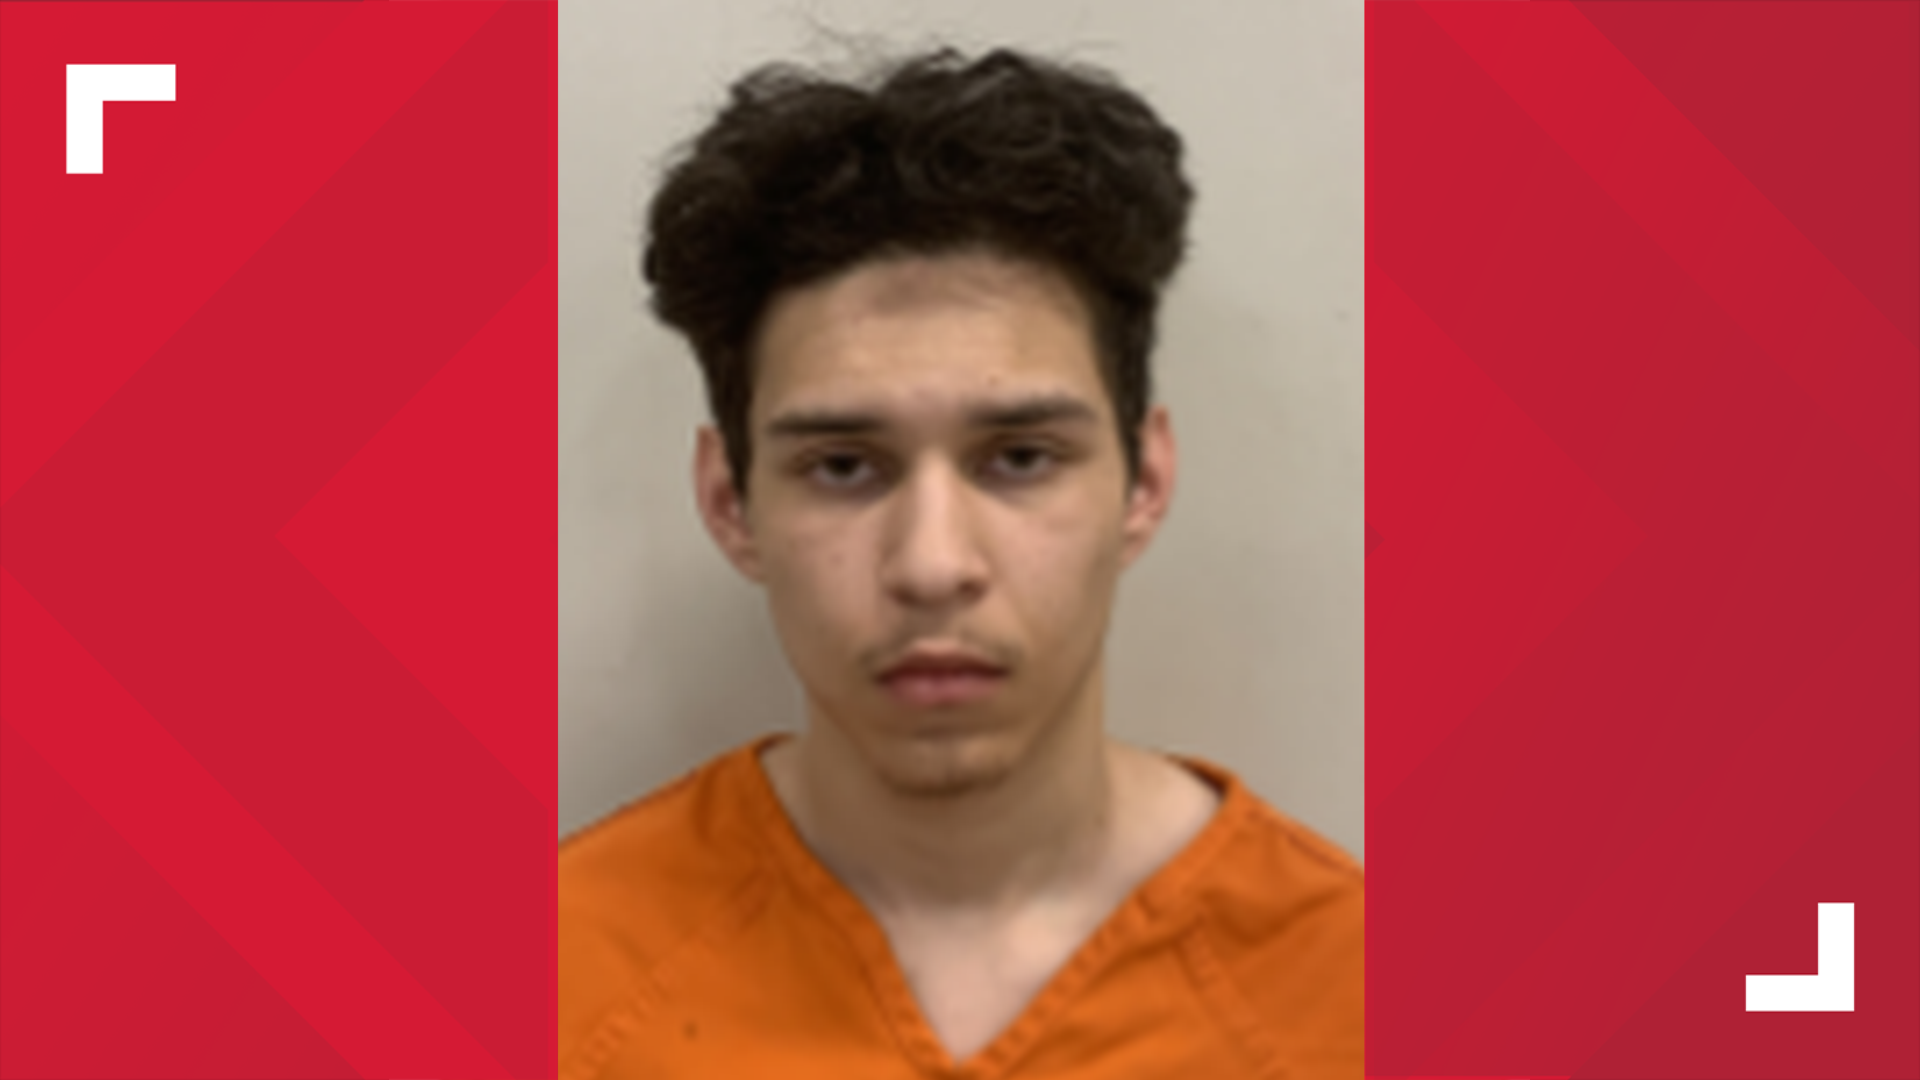 19-year-old Marcus Anthony Melendez was charged for the murder of Antonio Iglesias on May 4 at 7:30 p.m.